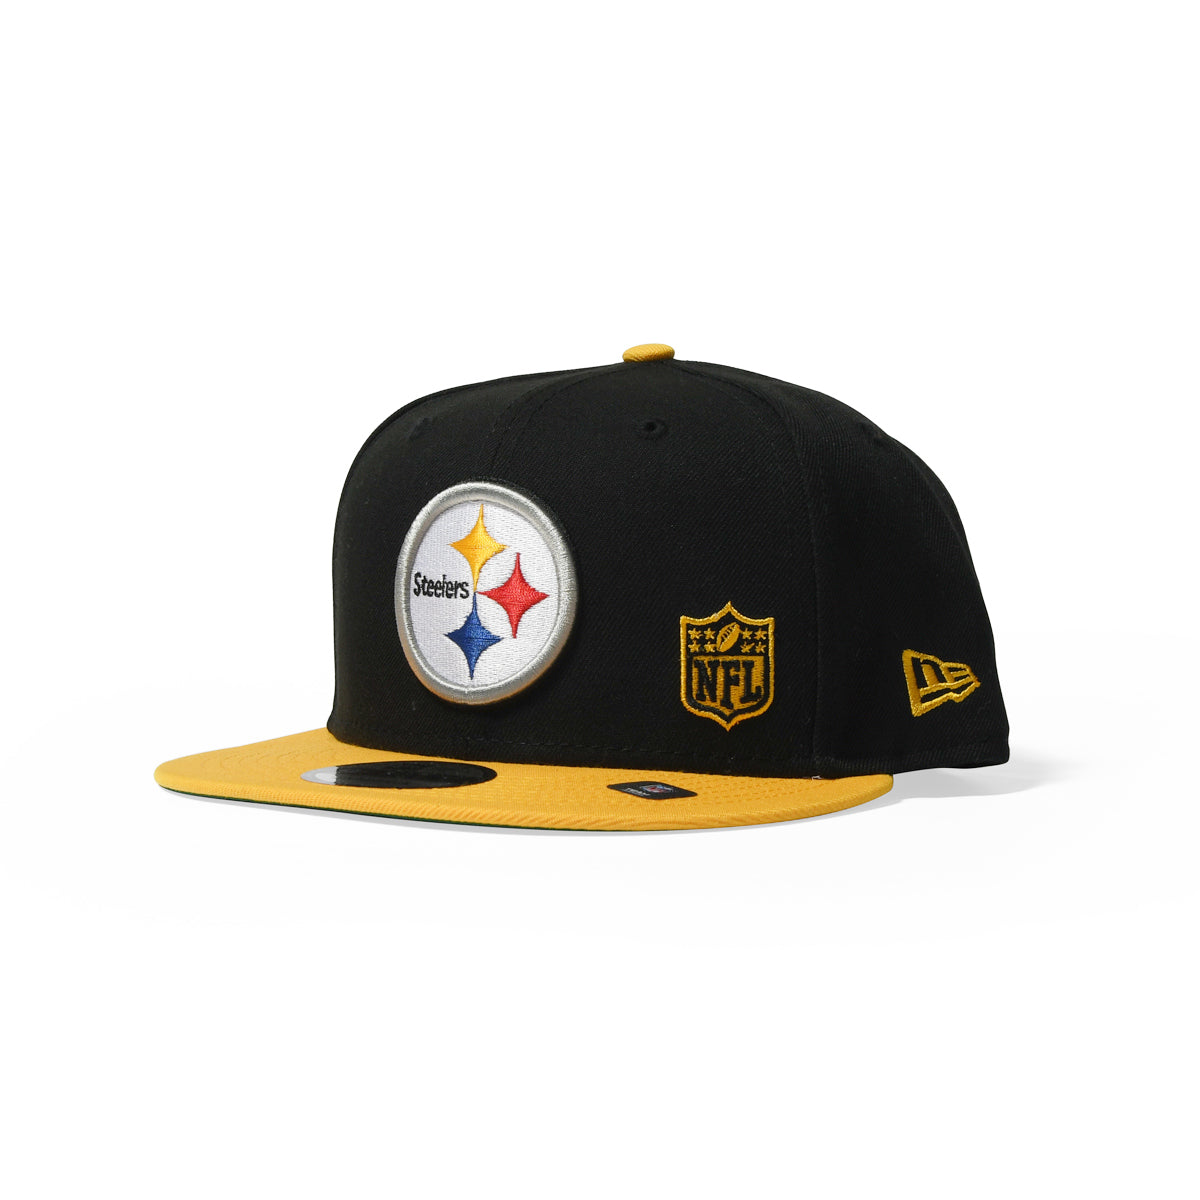 NEW ERA BlackLETTER ARCH PIT STEELERS 9FIFTY